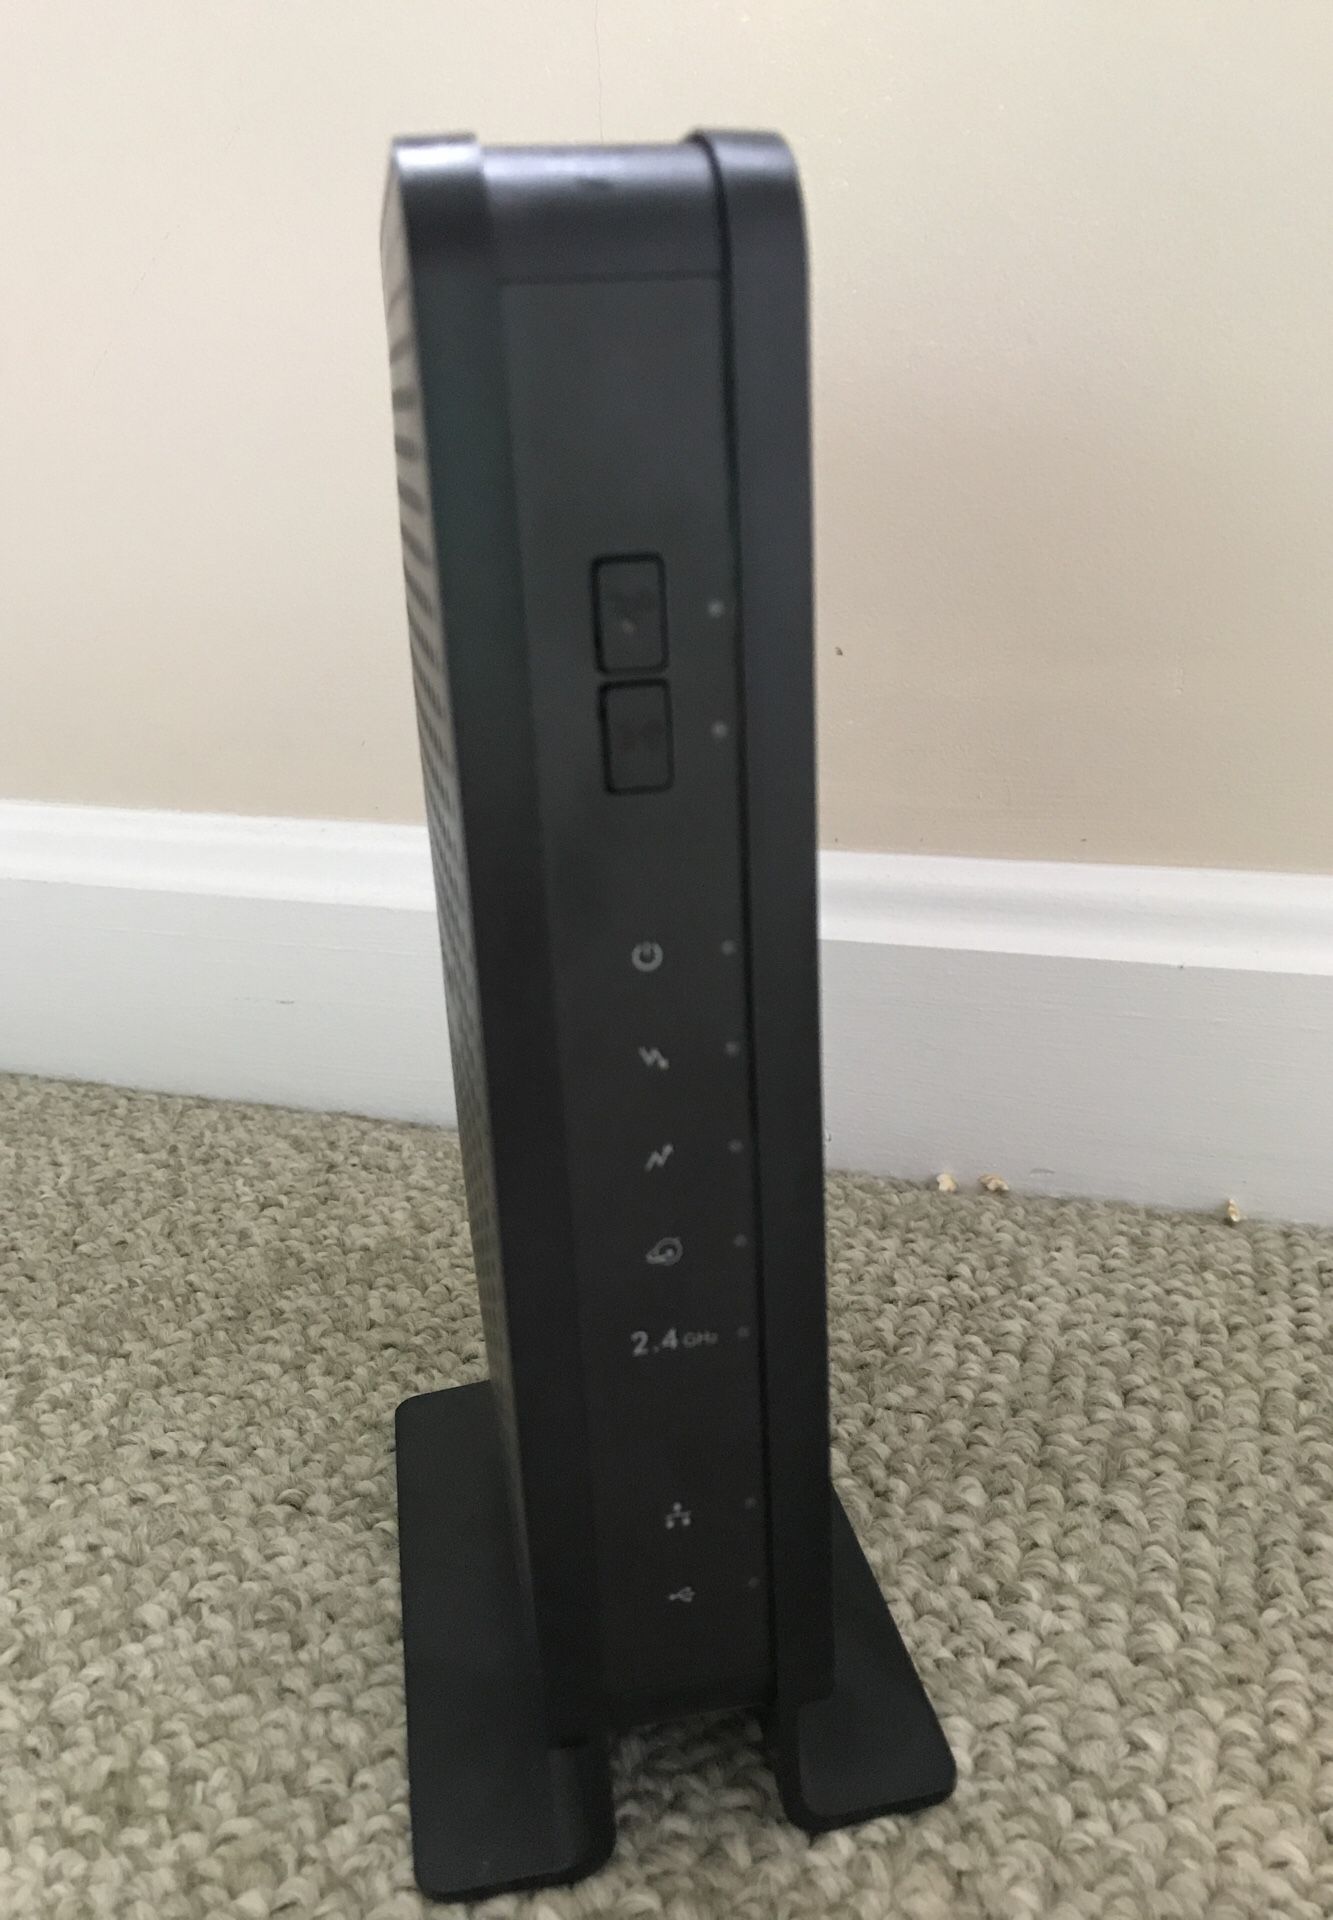 N300 WiFi Cable Modem Router. Model:C3000